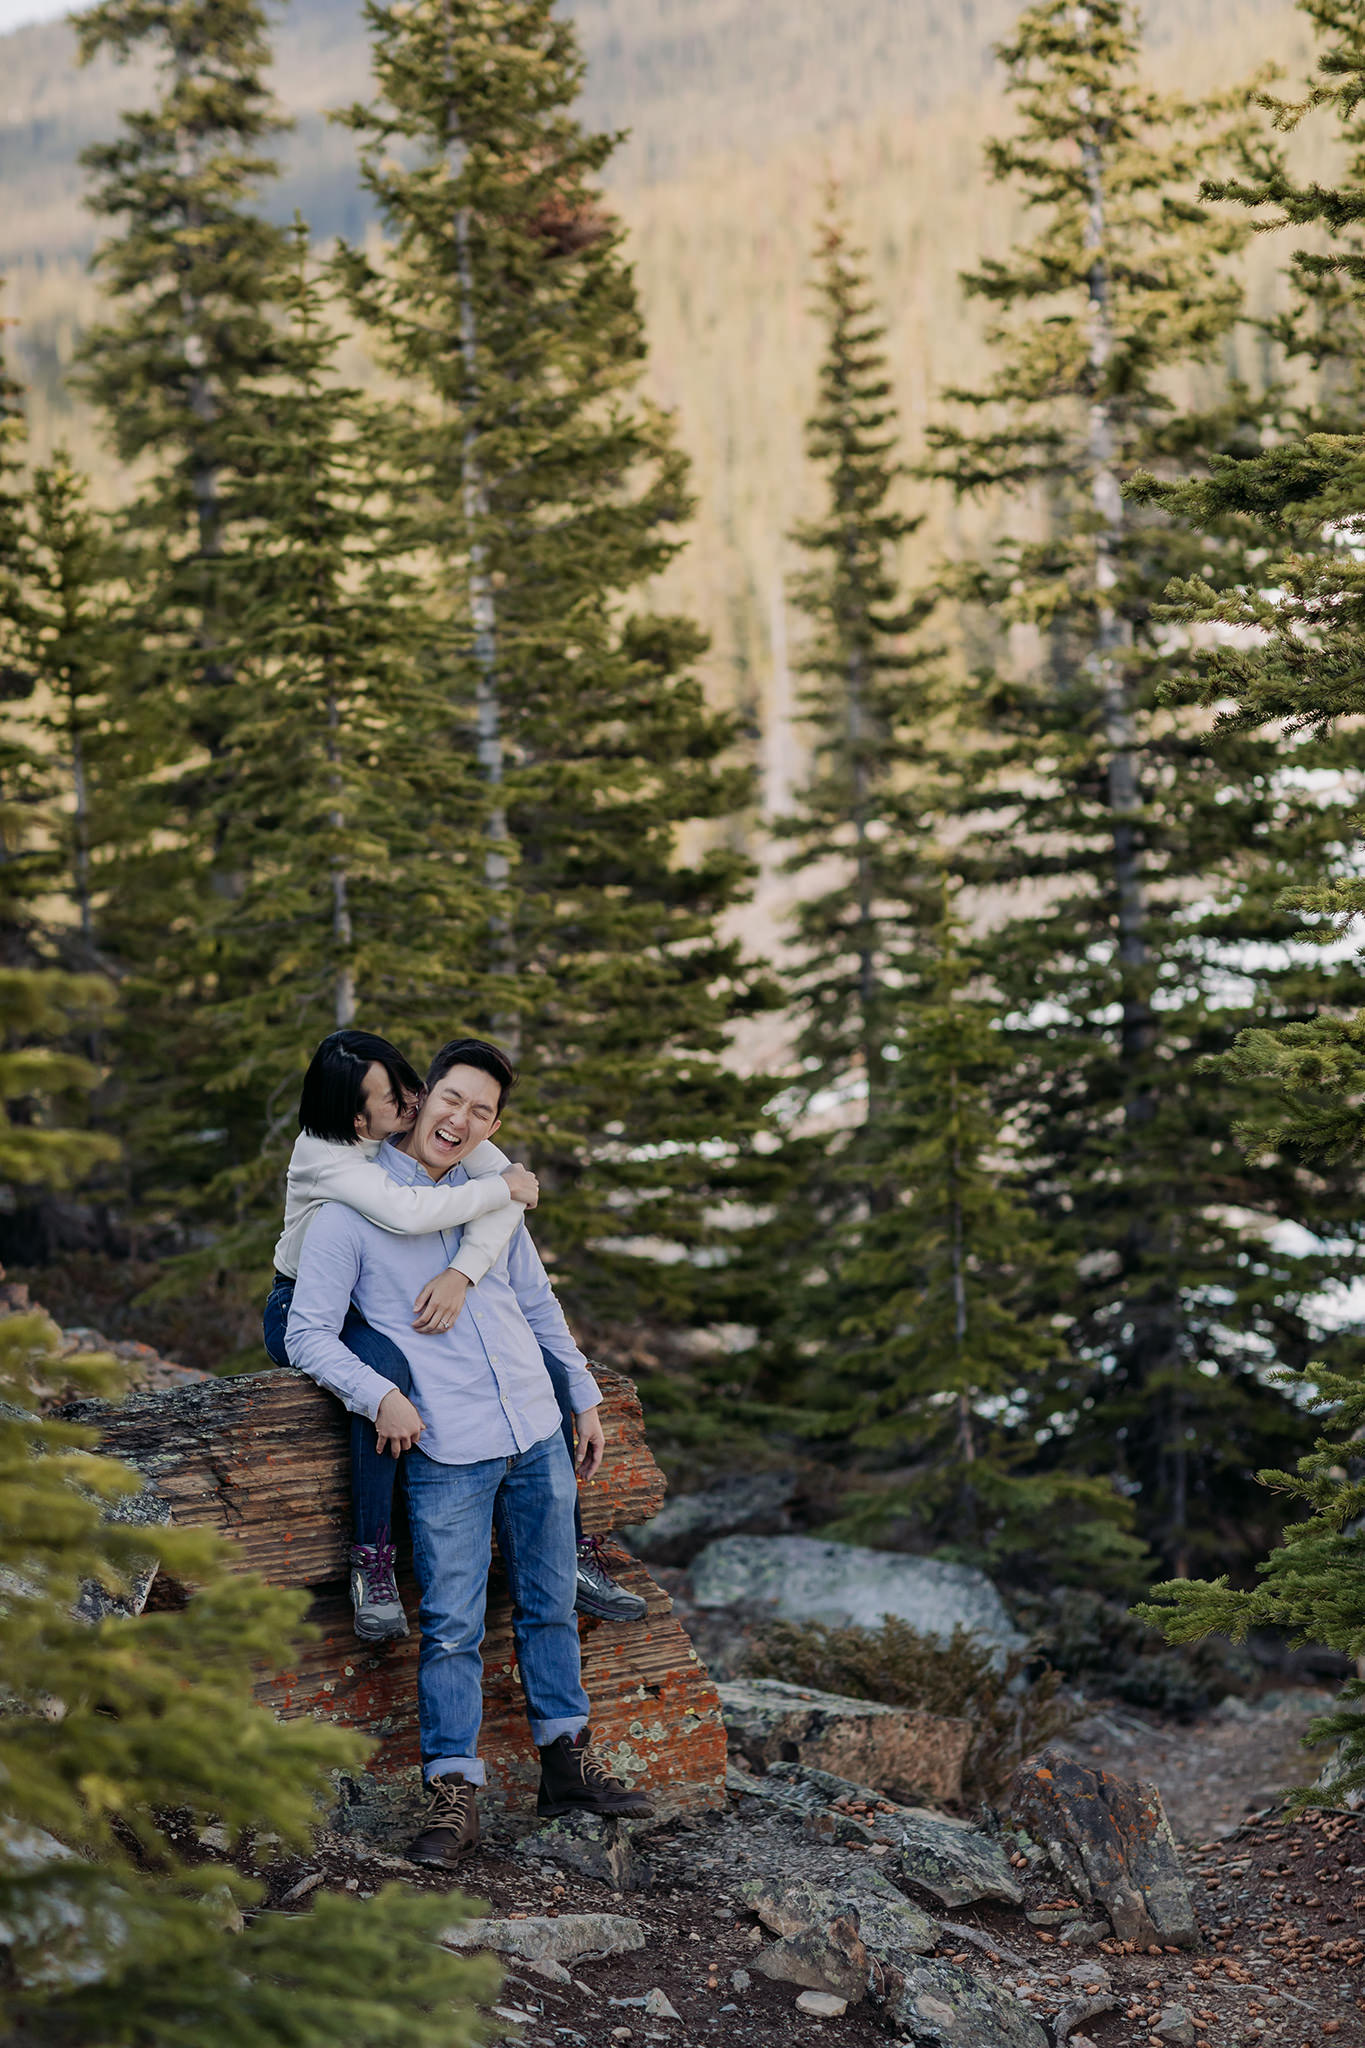 mountain forest couples photo session